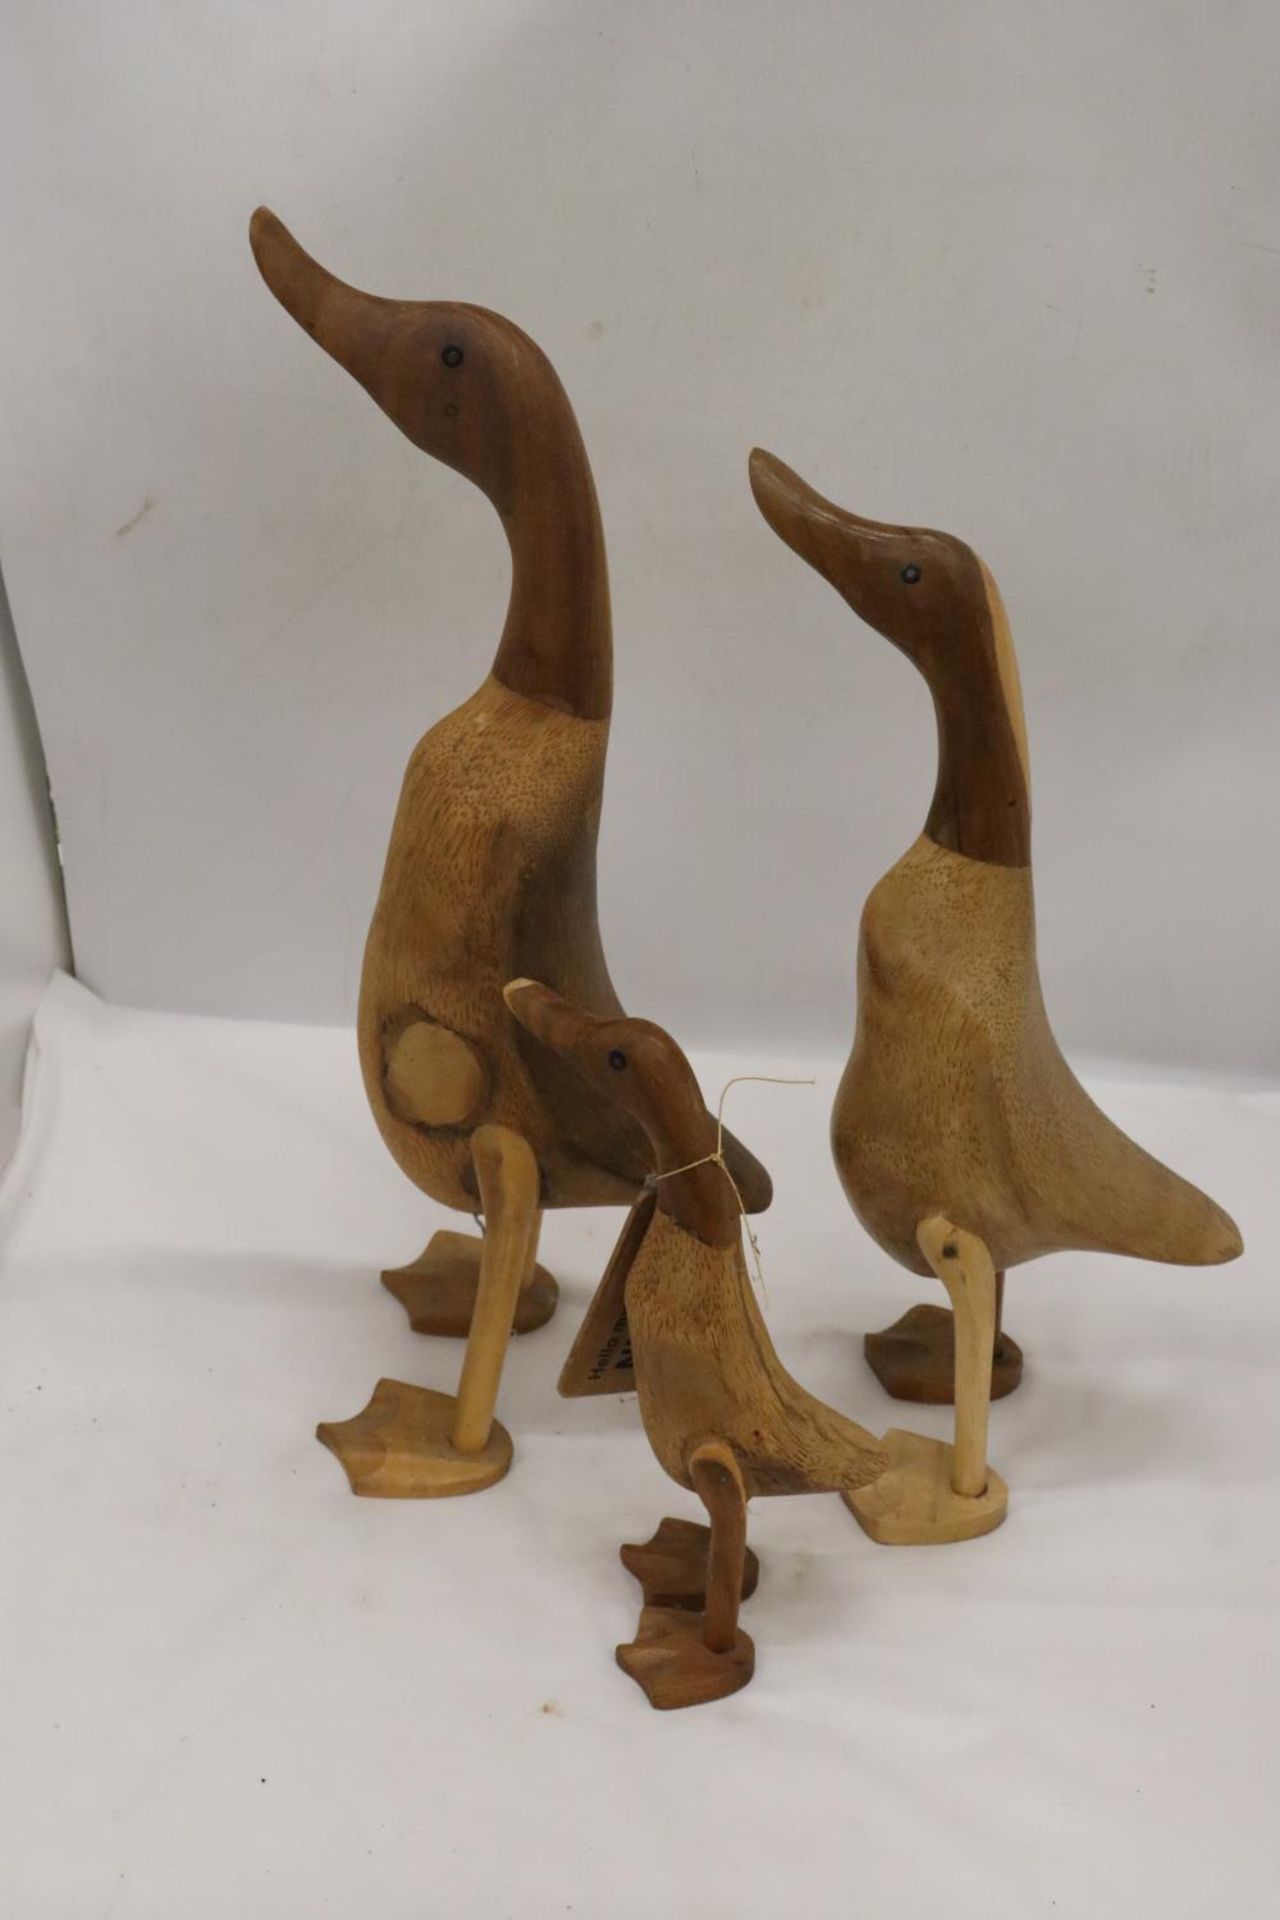 A WOODEN DUCK FAMILY TO INCLUDE DADDY DUCK, MUMMY DUCK AND BABY DUCK - Image 2 of 5